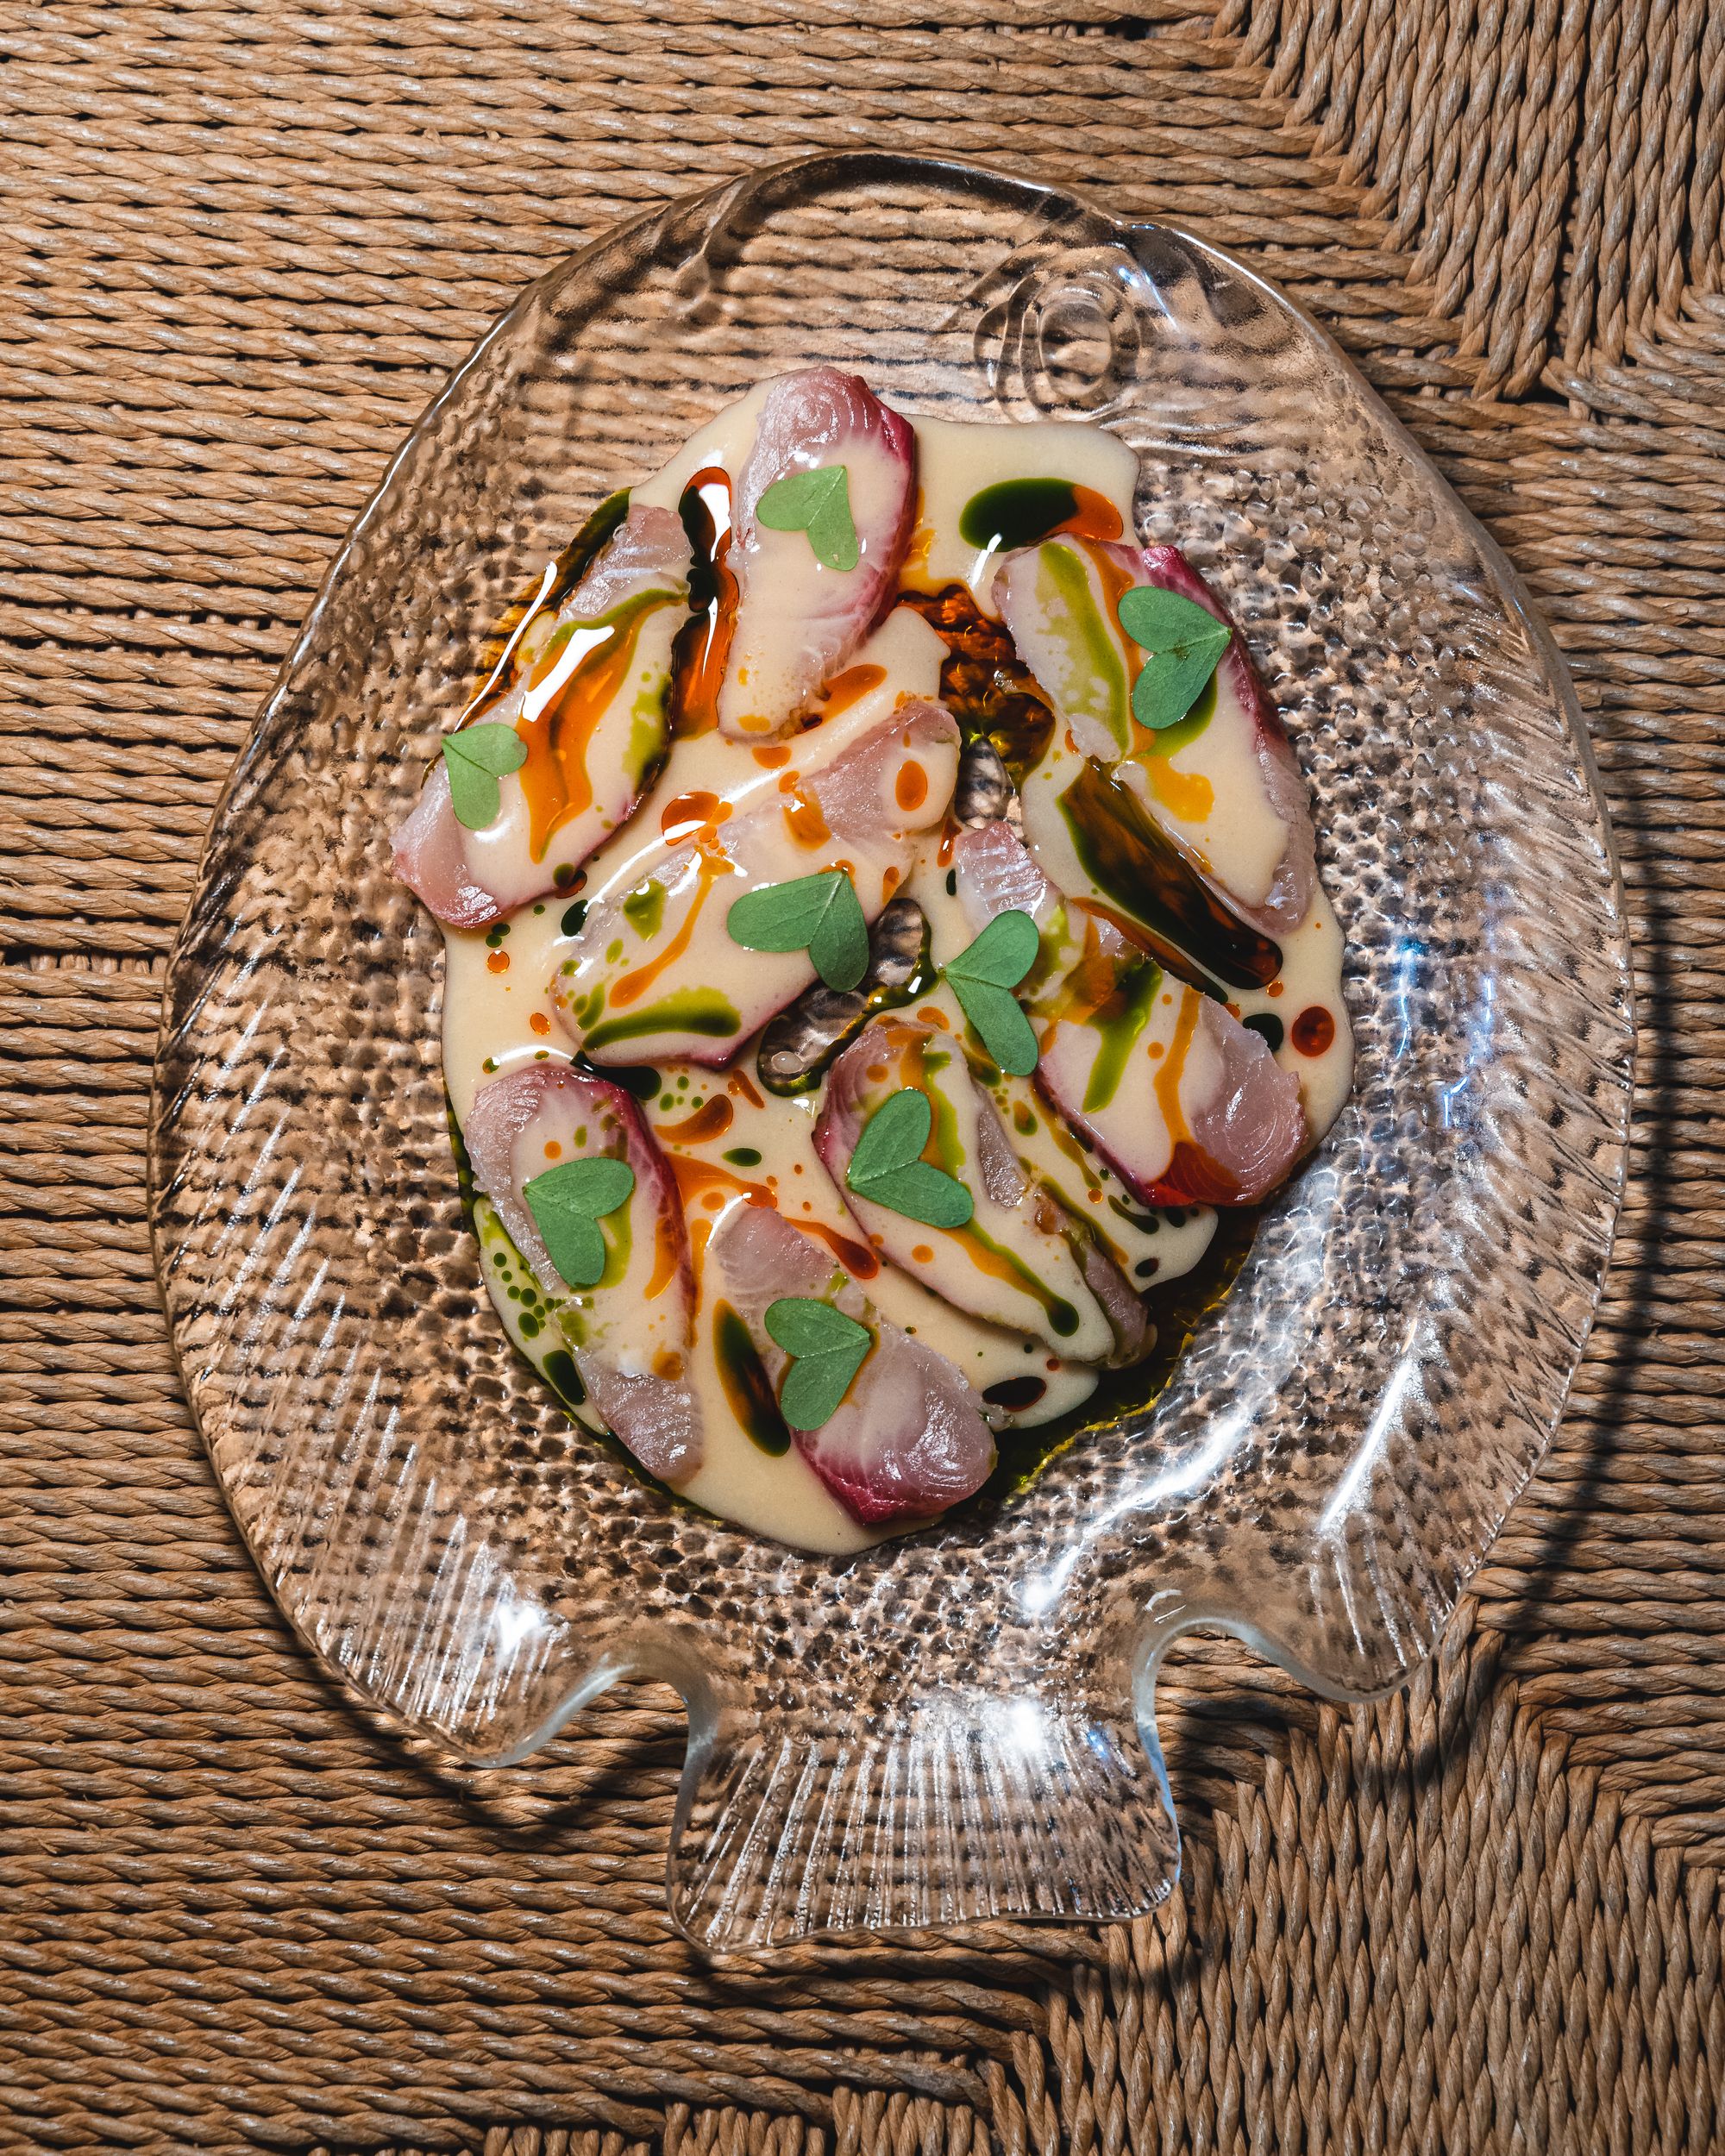 Kingfish ceviche with a creamy coloured sauce and green heart shaped herbs